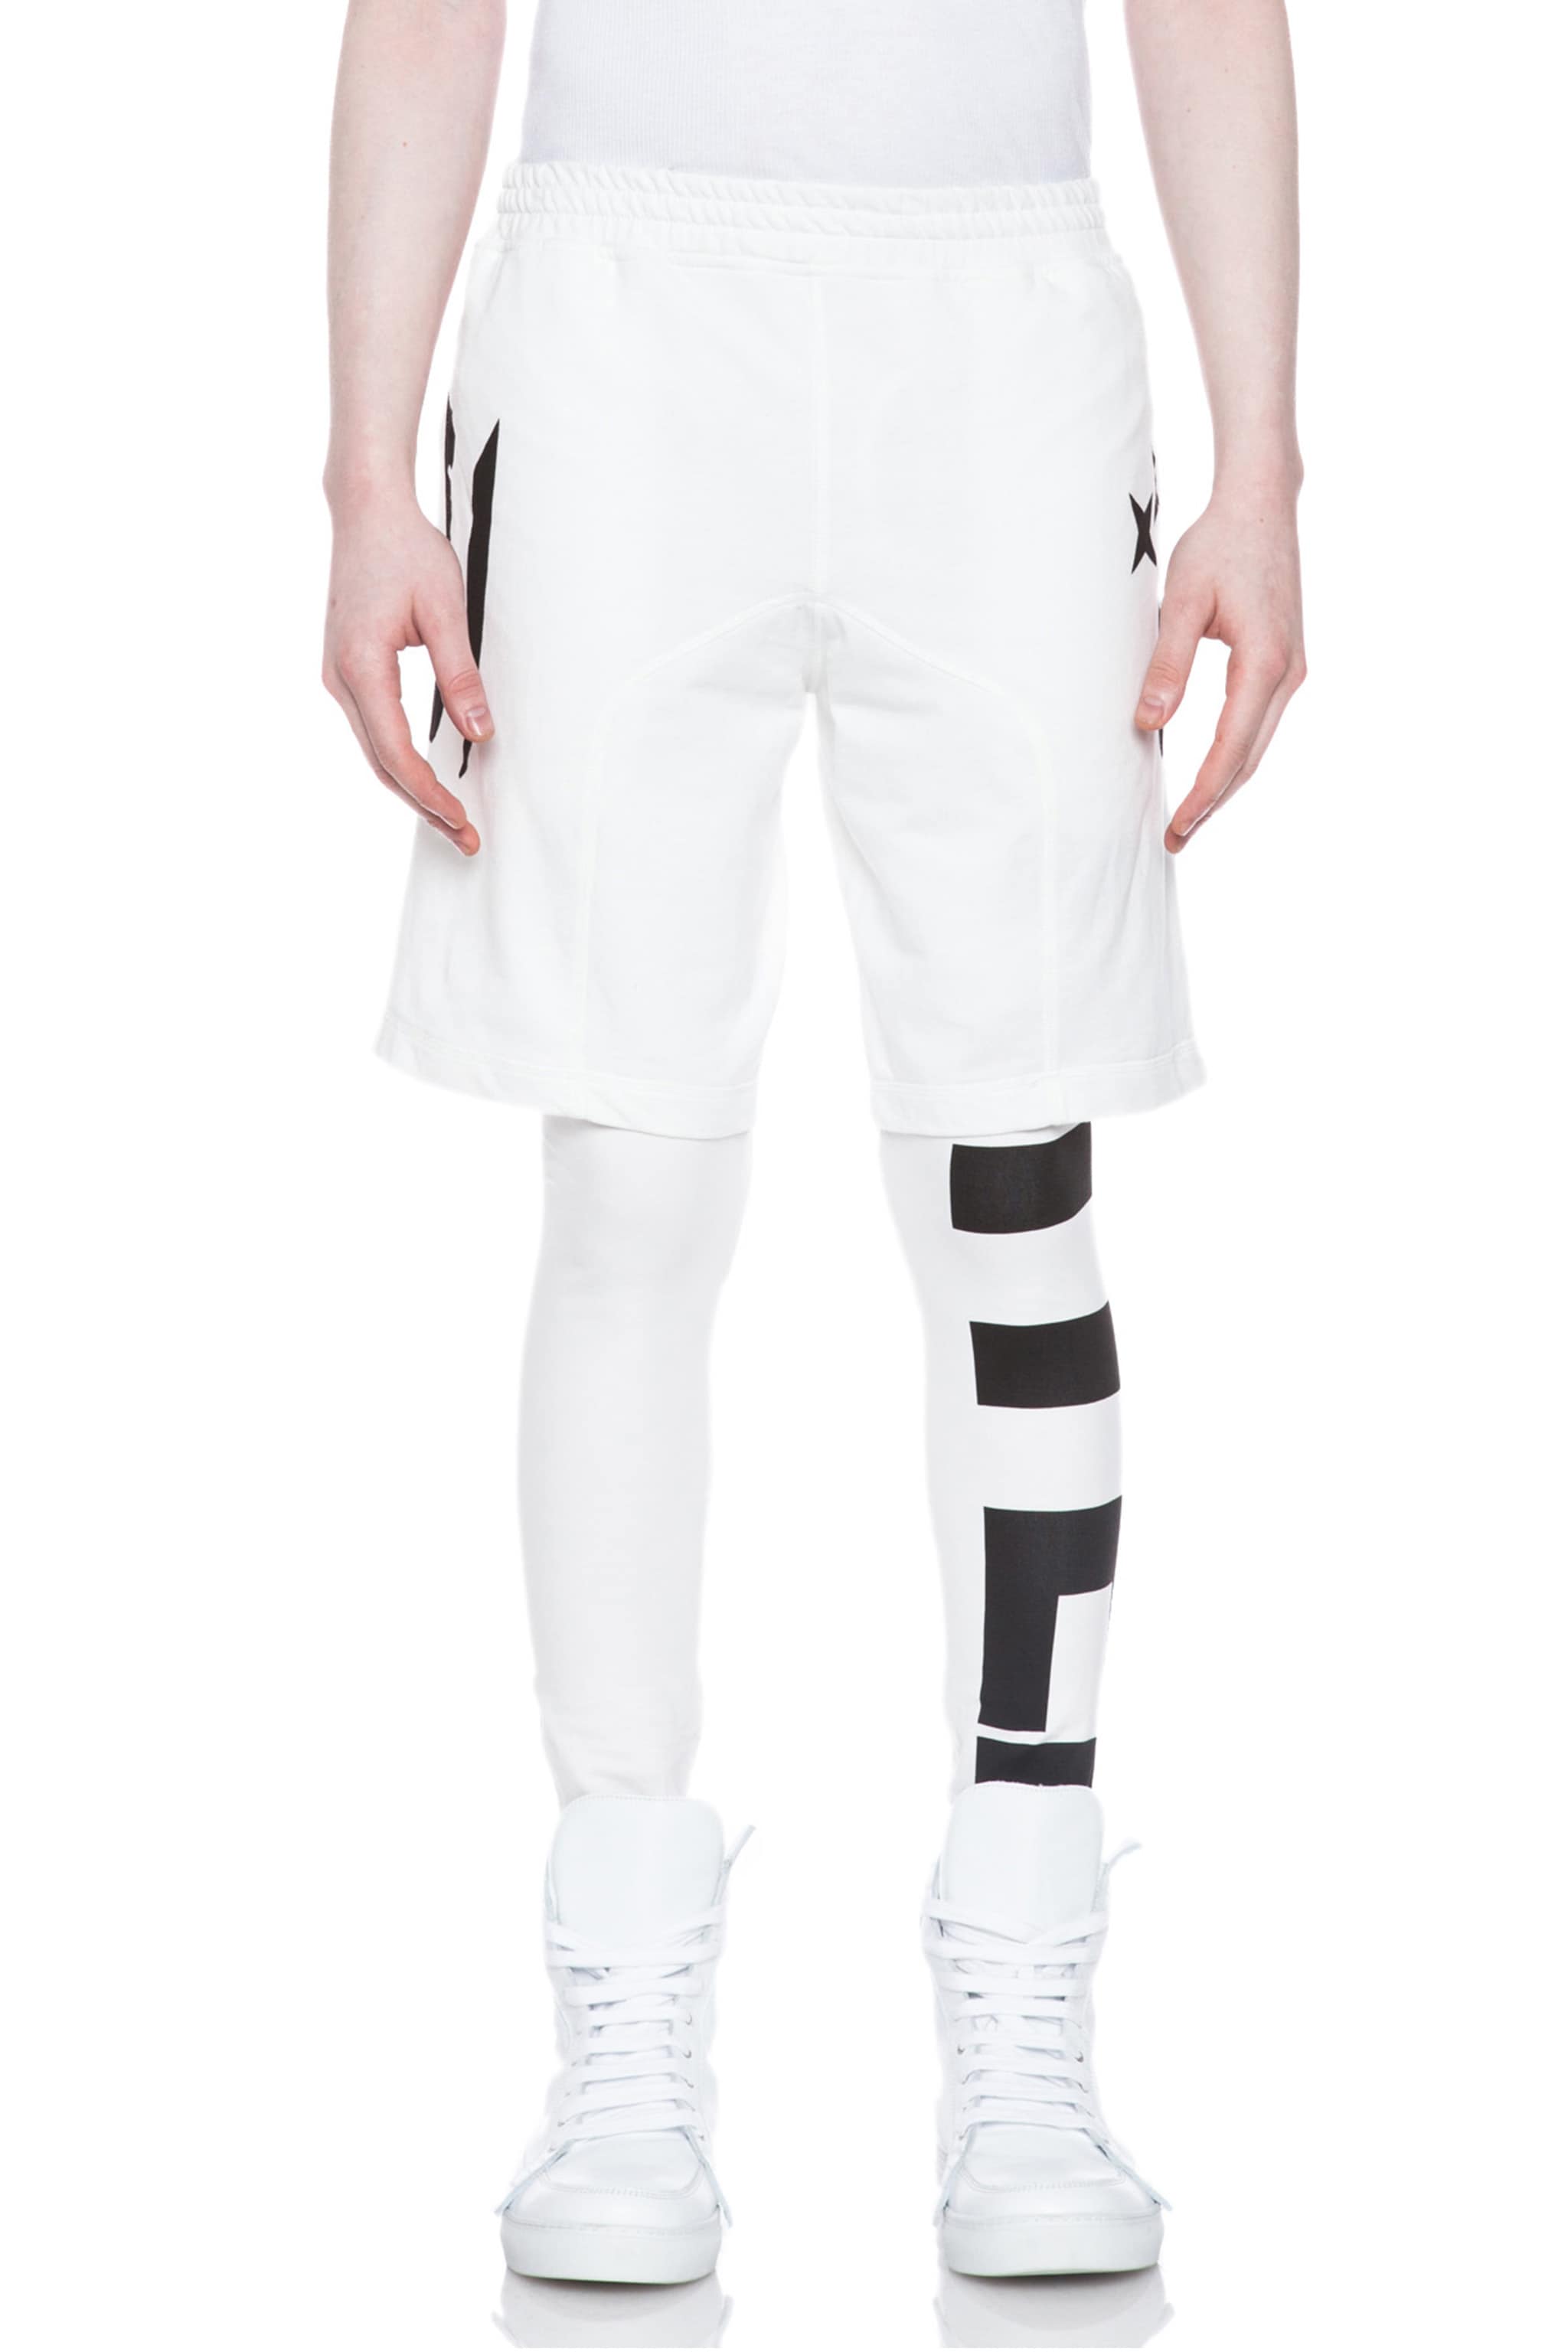 Image 1 of KTZ United Print Cotton Shorts with Leggings in White